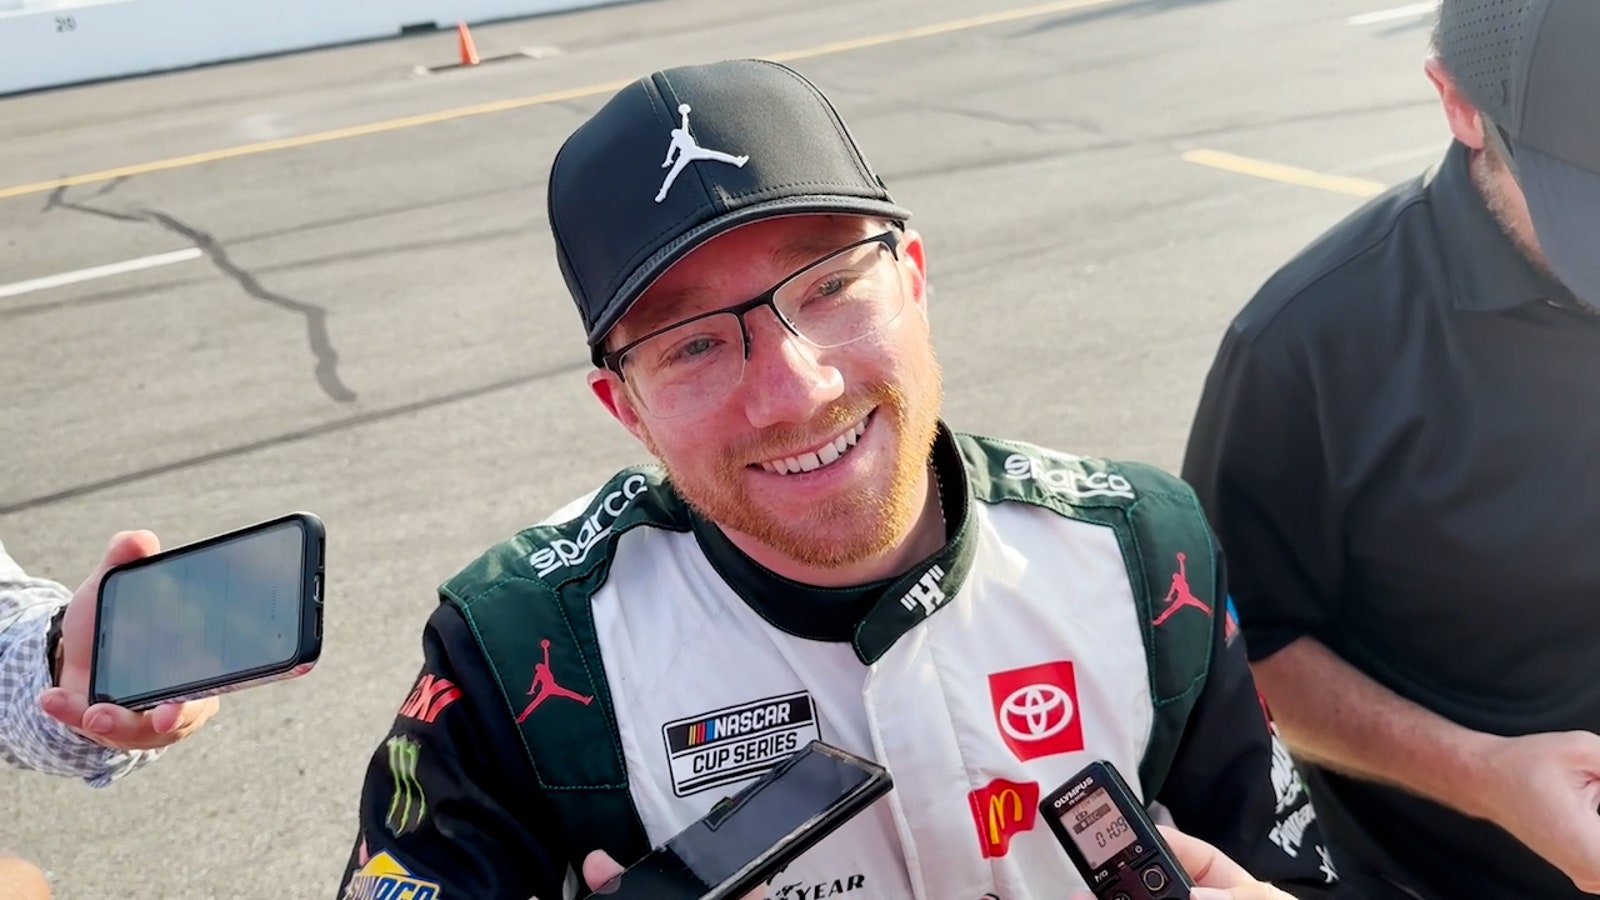 Tyler Reddick described what happened in the incident with Austin Dillon at Pocono.